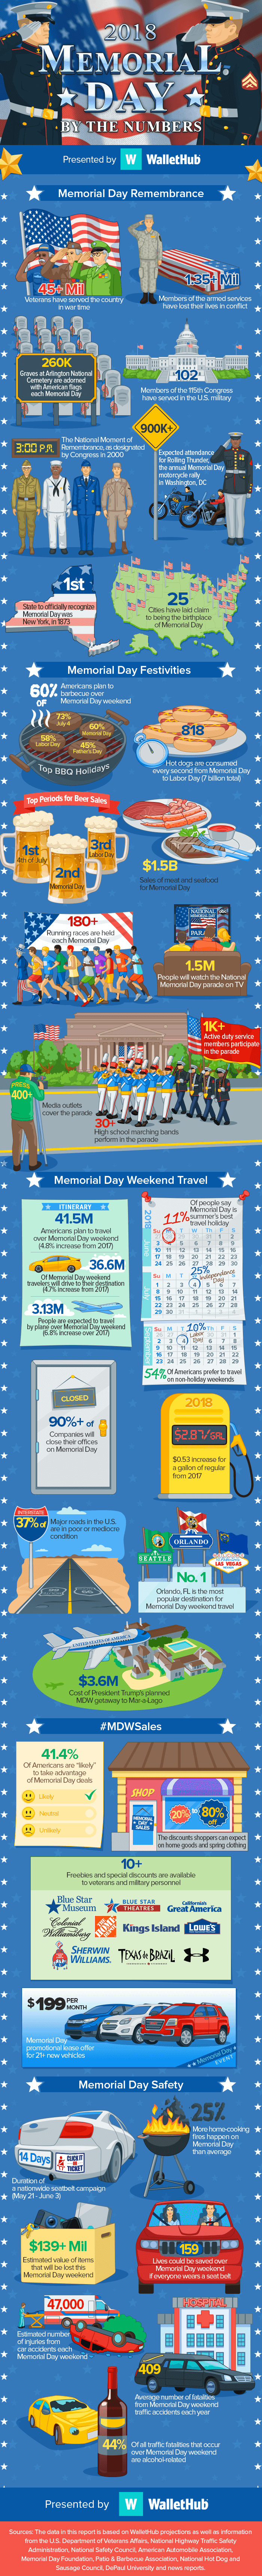 2018-memorial-day-by-the-numbers-v6.png